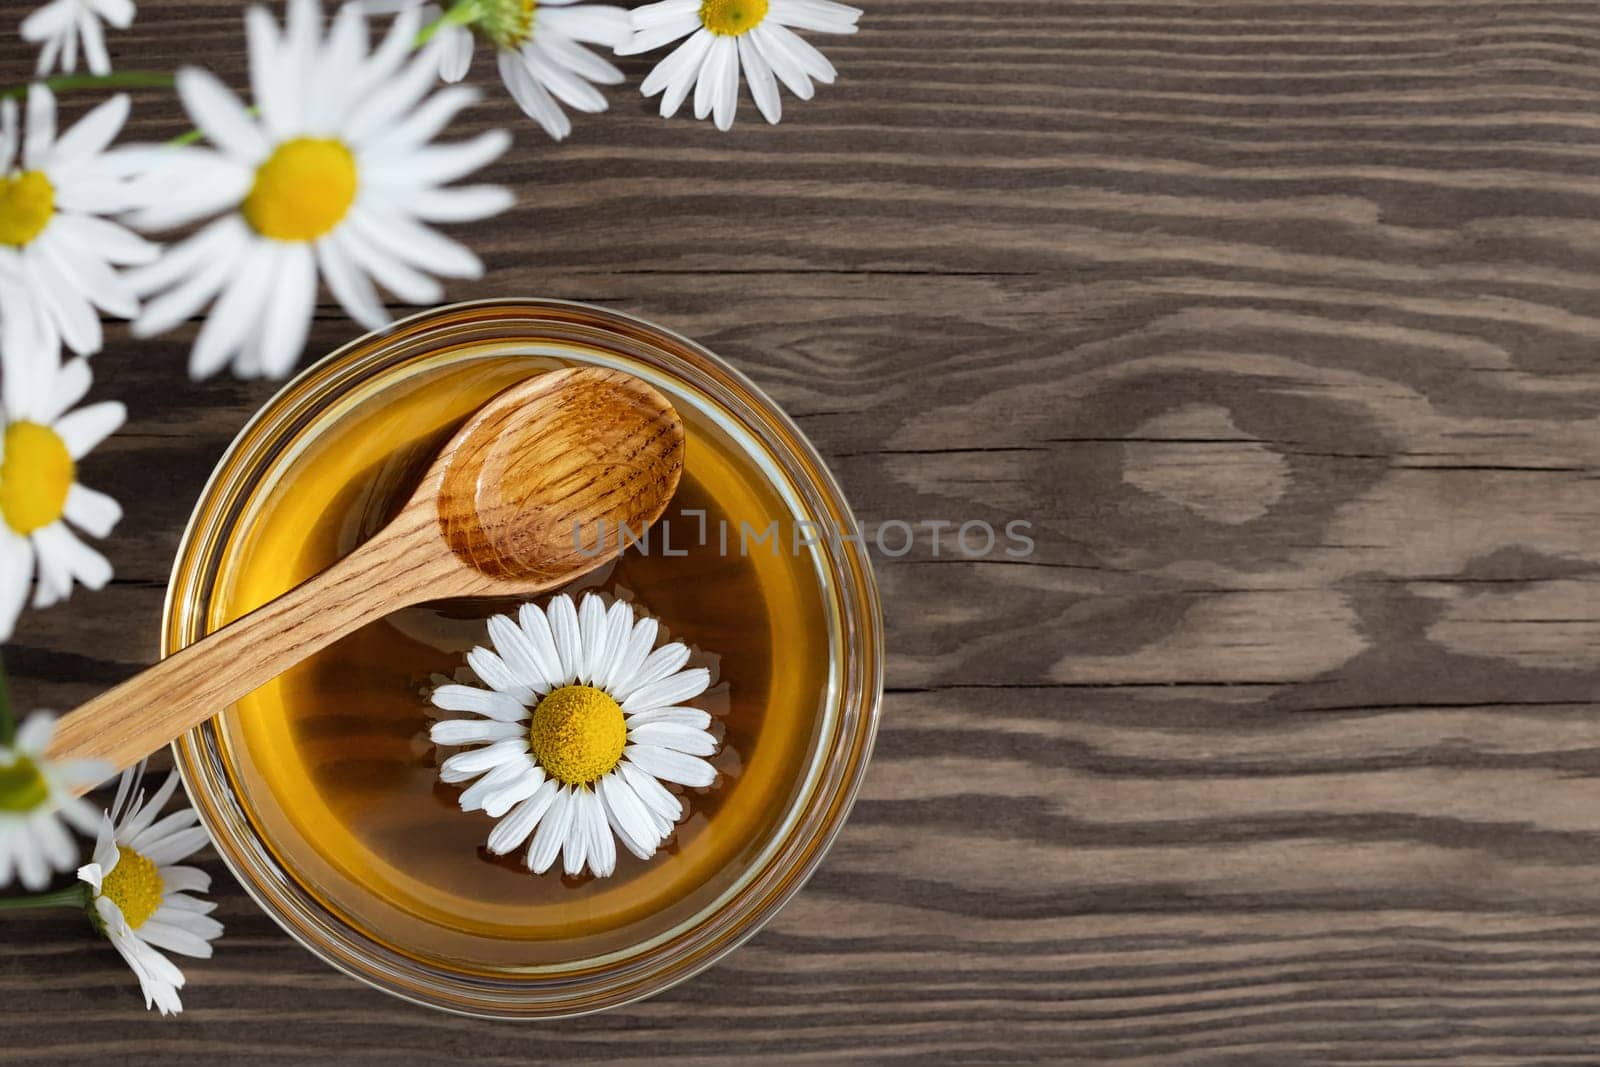 Chamomile syrup in a small bowl and in a jar in the patio on a wooden table by galsand